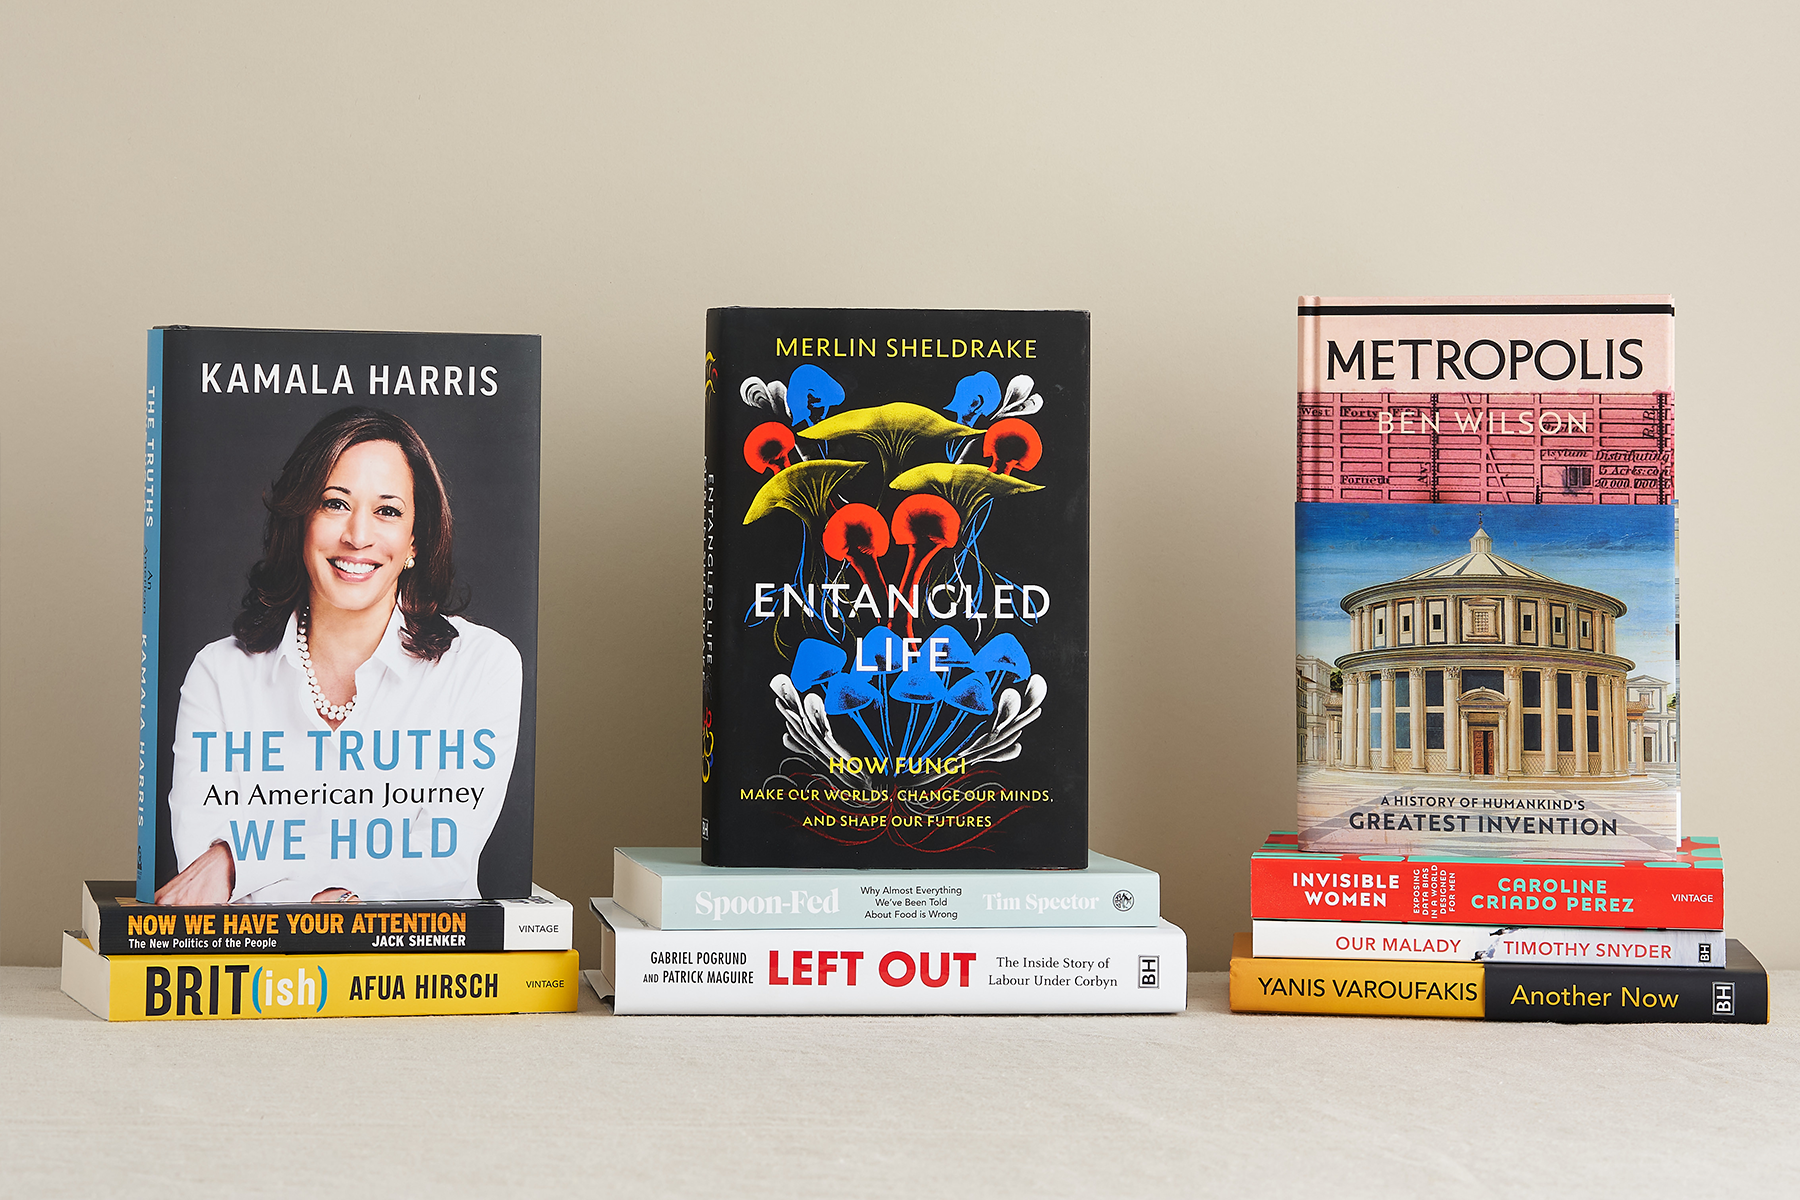 Three stacks of books, featuring The Truths We Hold by Kamala Harris, Entangled Life by Merlin Sheldrake, Metropolis by Ben Wilson